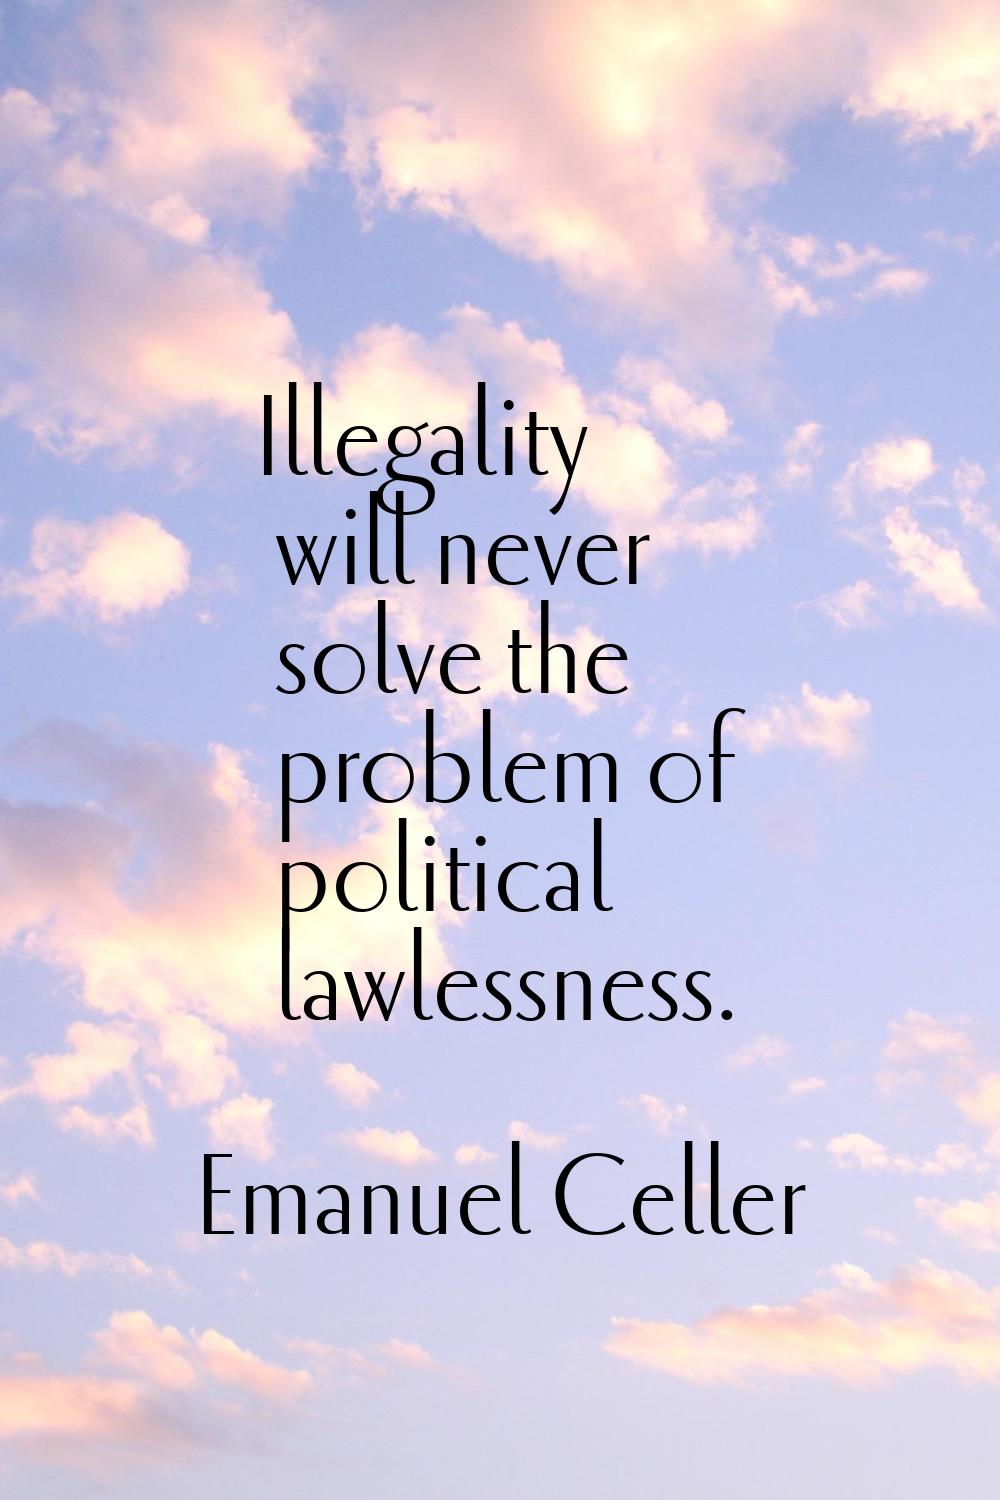 Illegality will never solve the problem of political lawlessness.